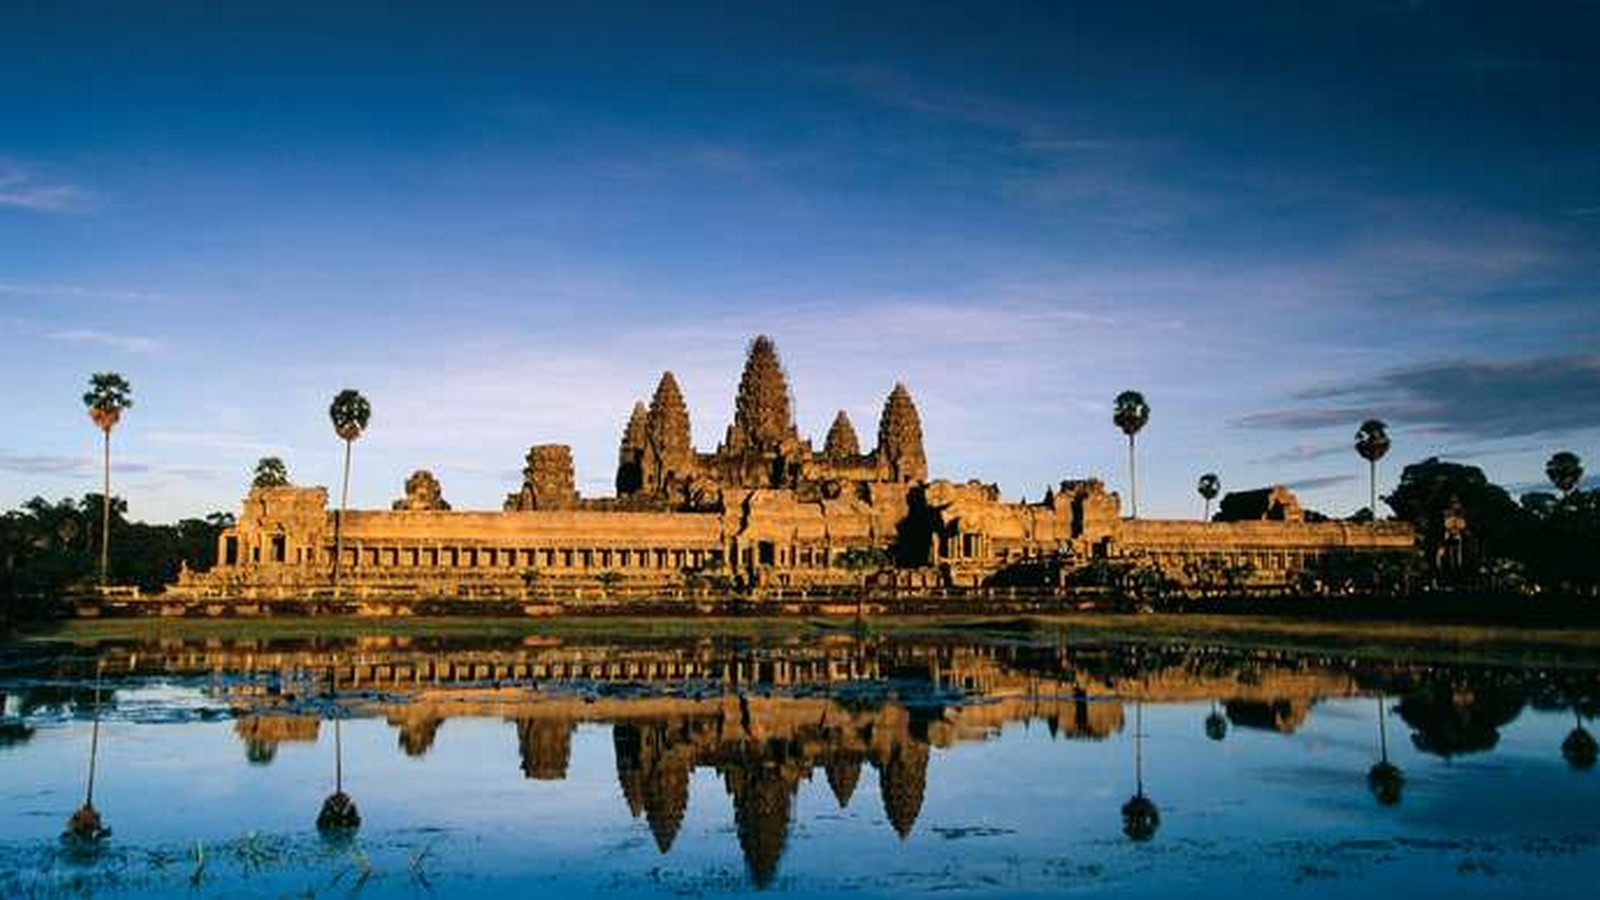 Youtube for Architects: The Buried Mysteries Of Angkor Wat - The City Of God Kings by Timeline - Sheet5